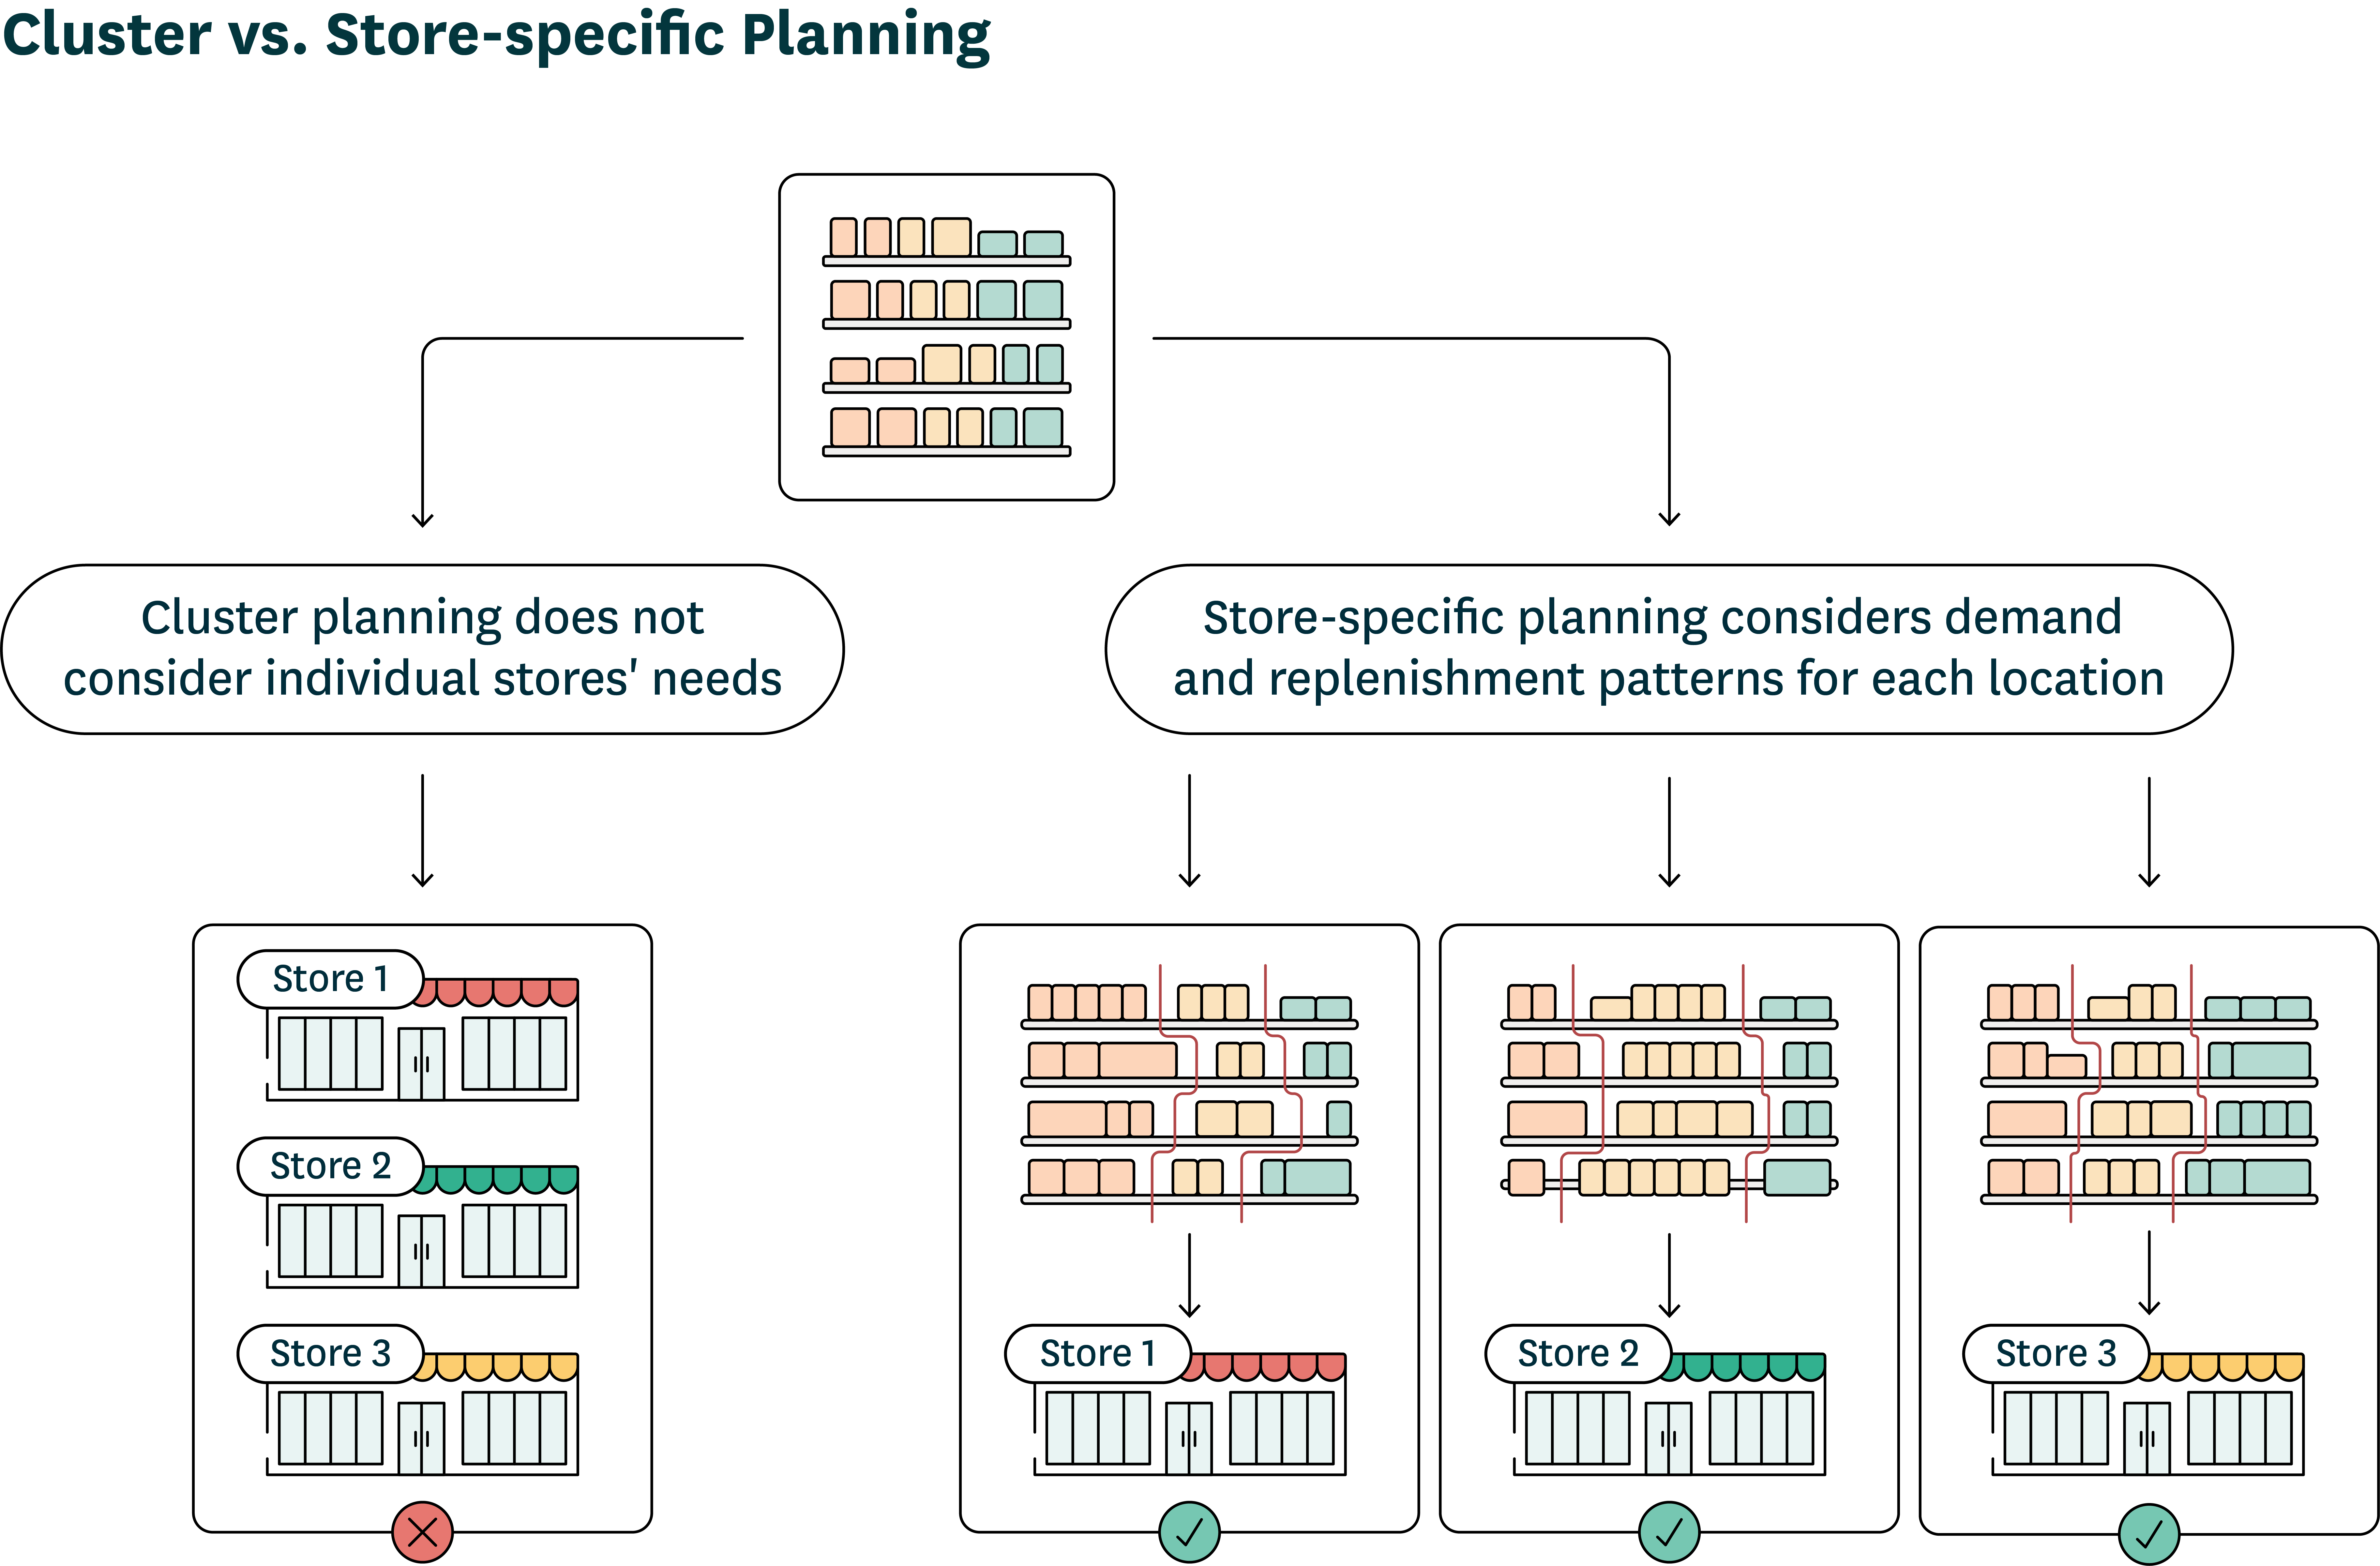 A diagram highlighting the difference between a cluster-based planogram and several store-specific planograms. The store-specific planograms vary widely store-to-store in the number of specific products stocked per category due to customer demand varying widely between locations.